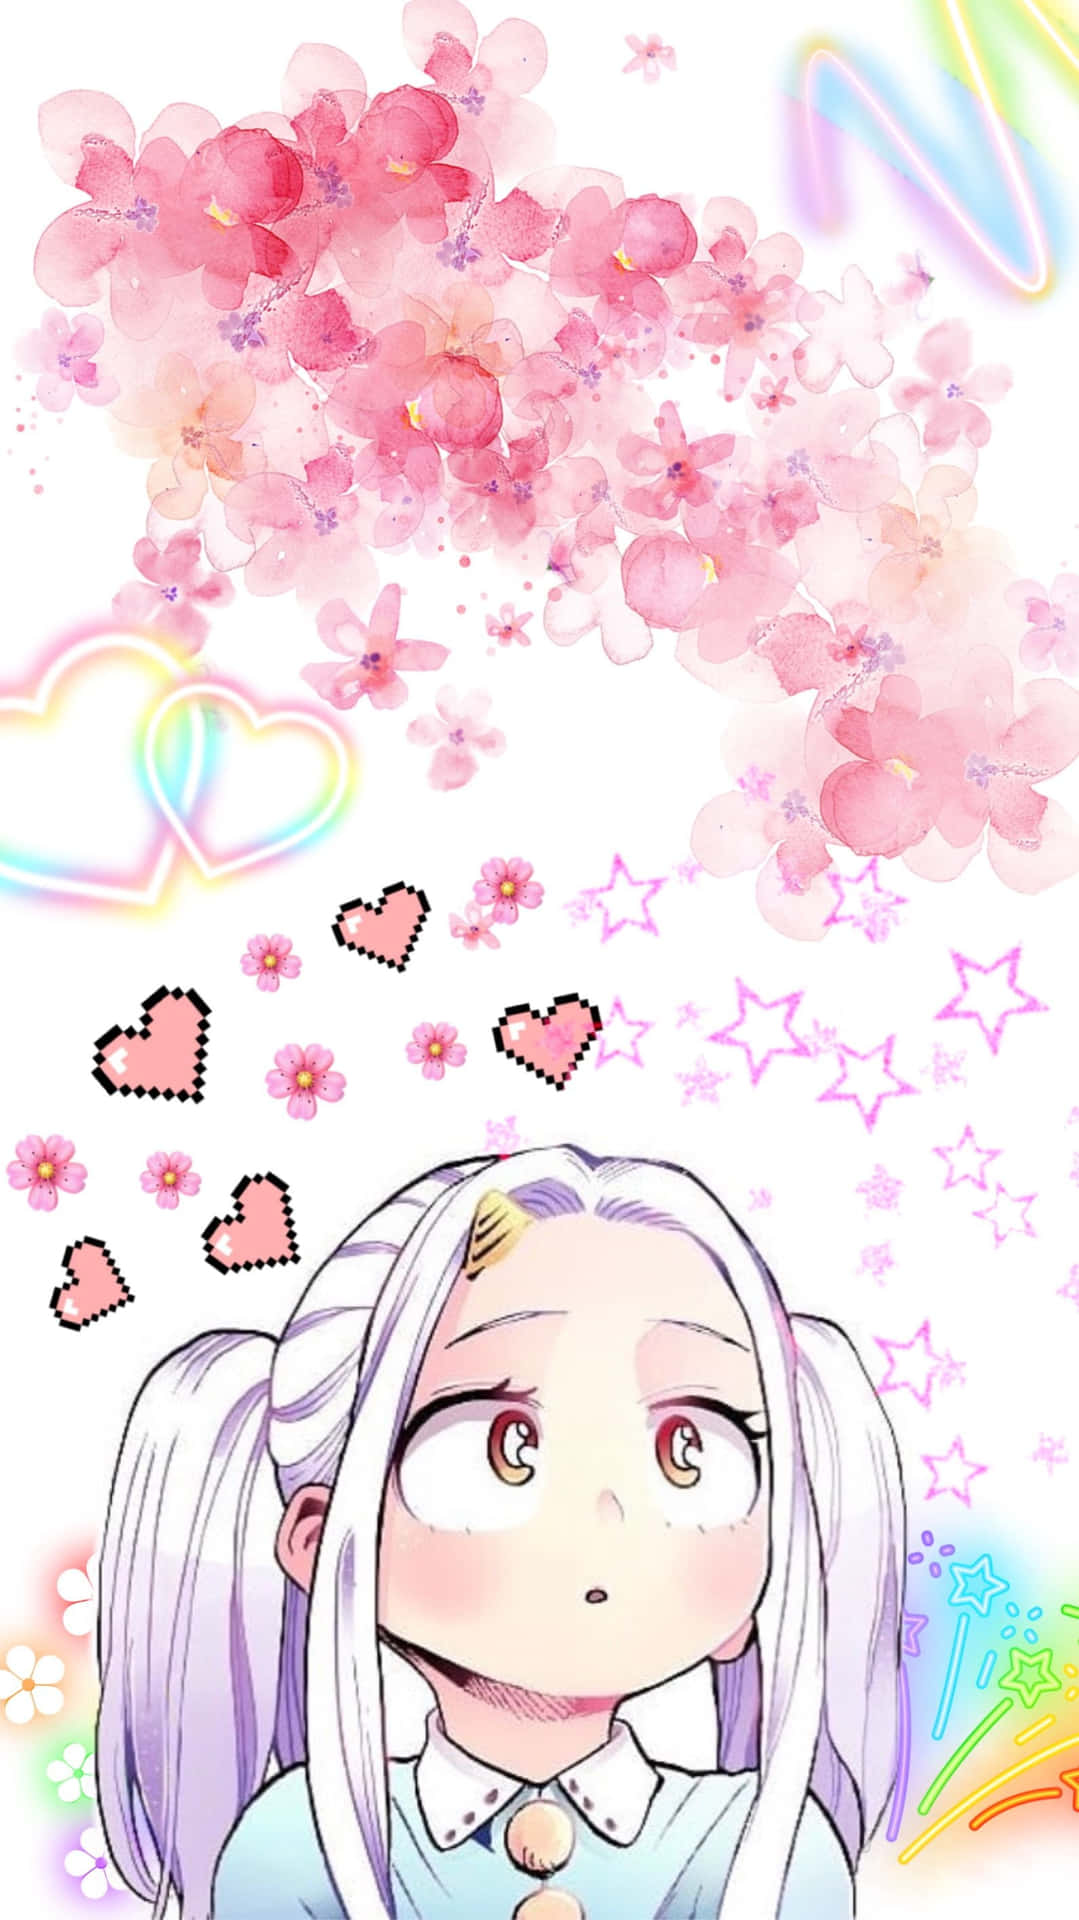 Cute Eri With Girly Decorations